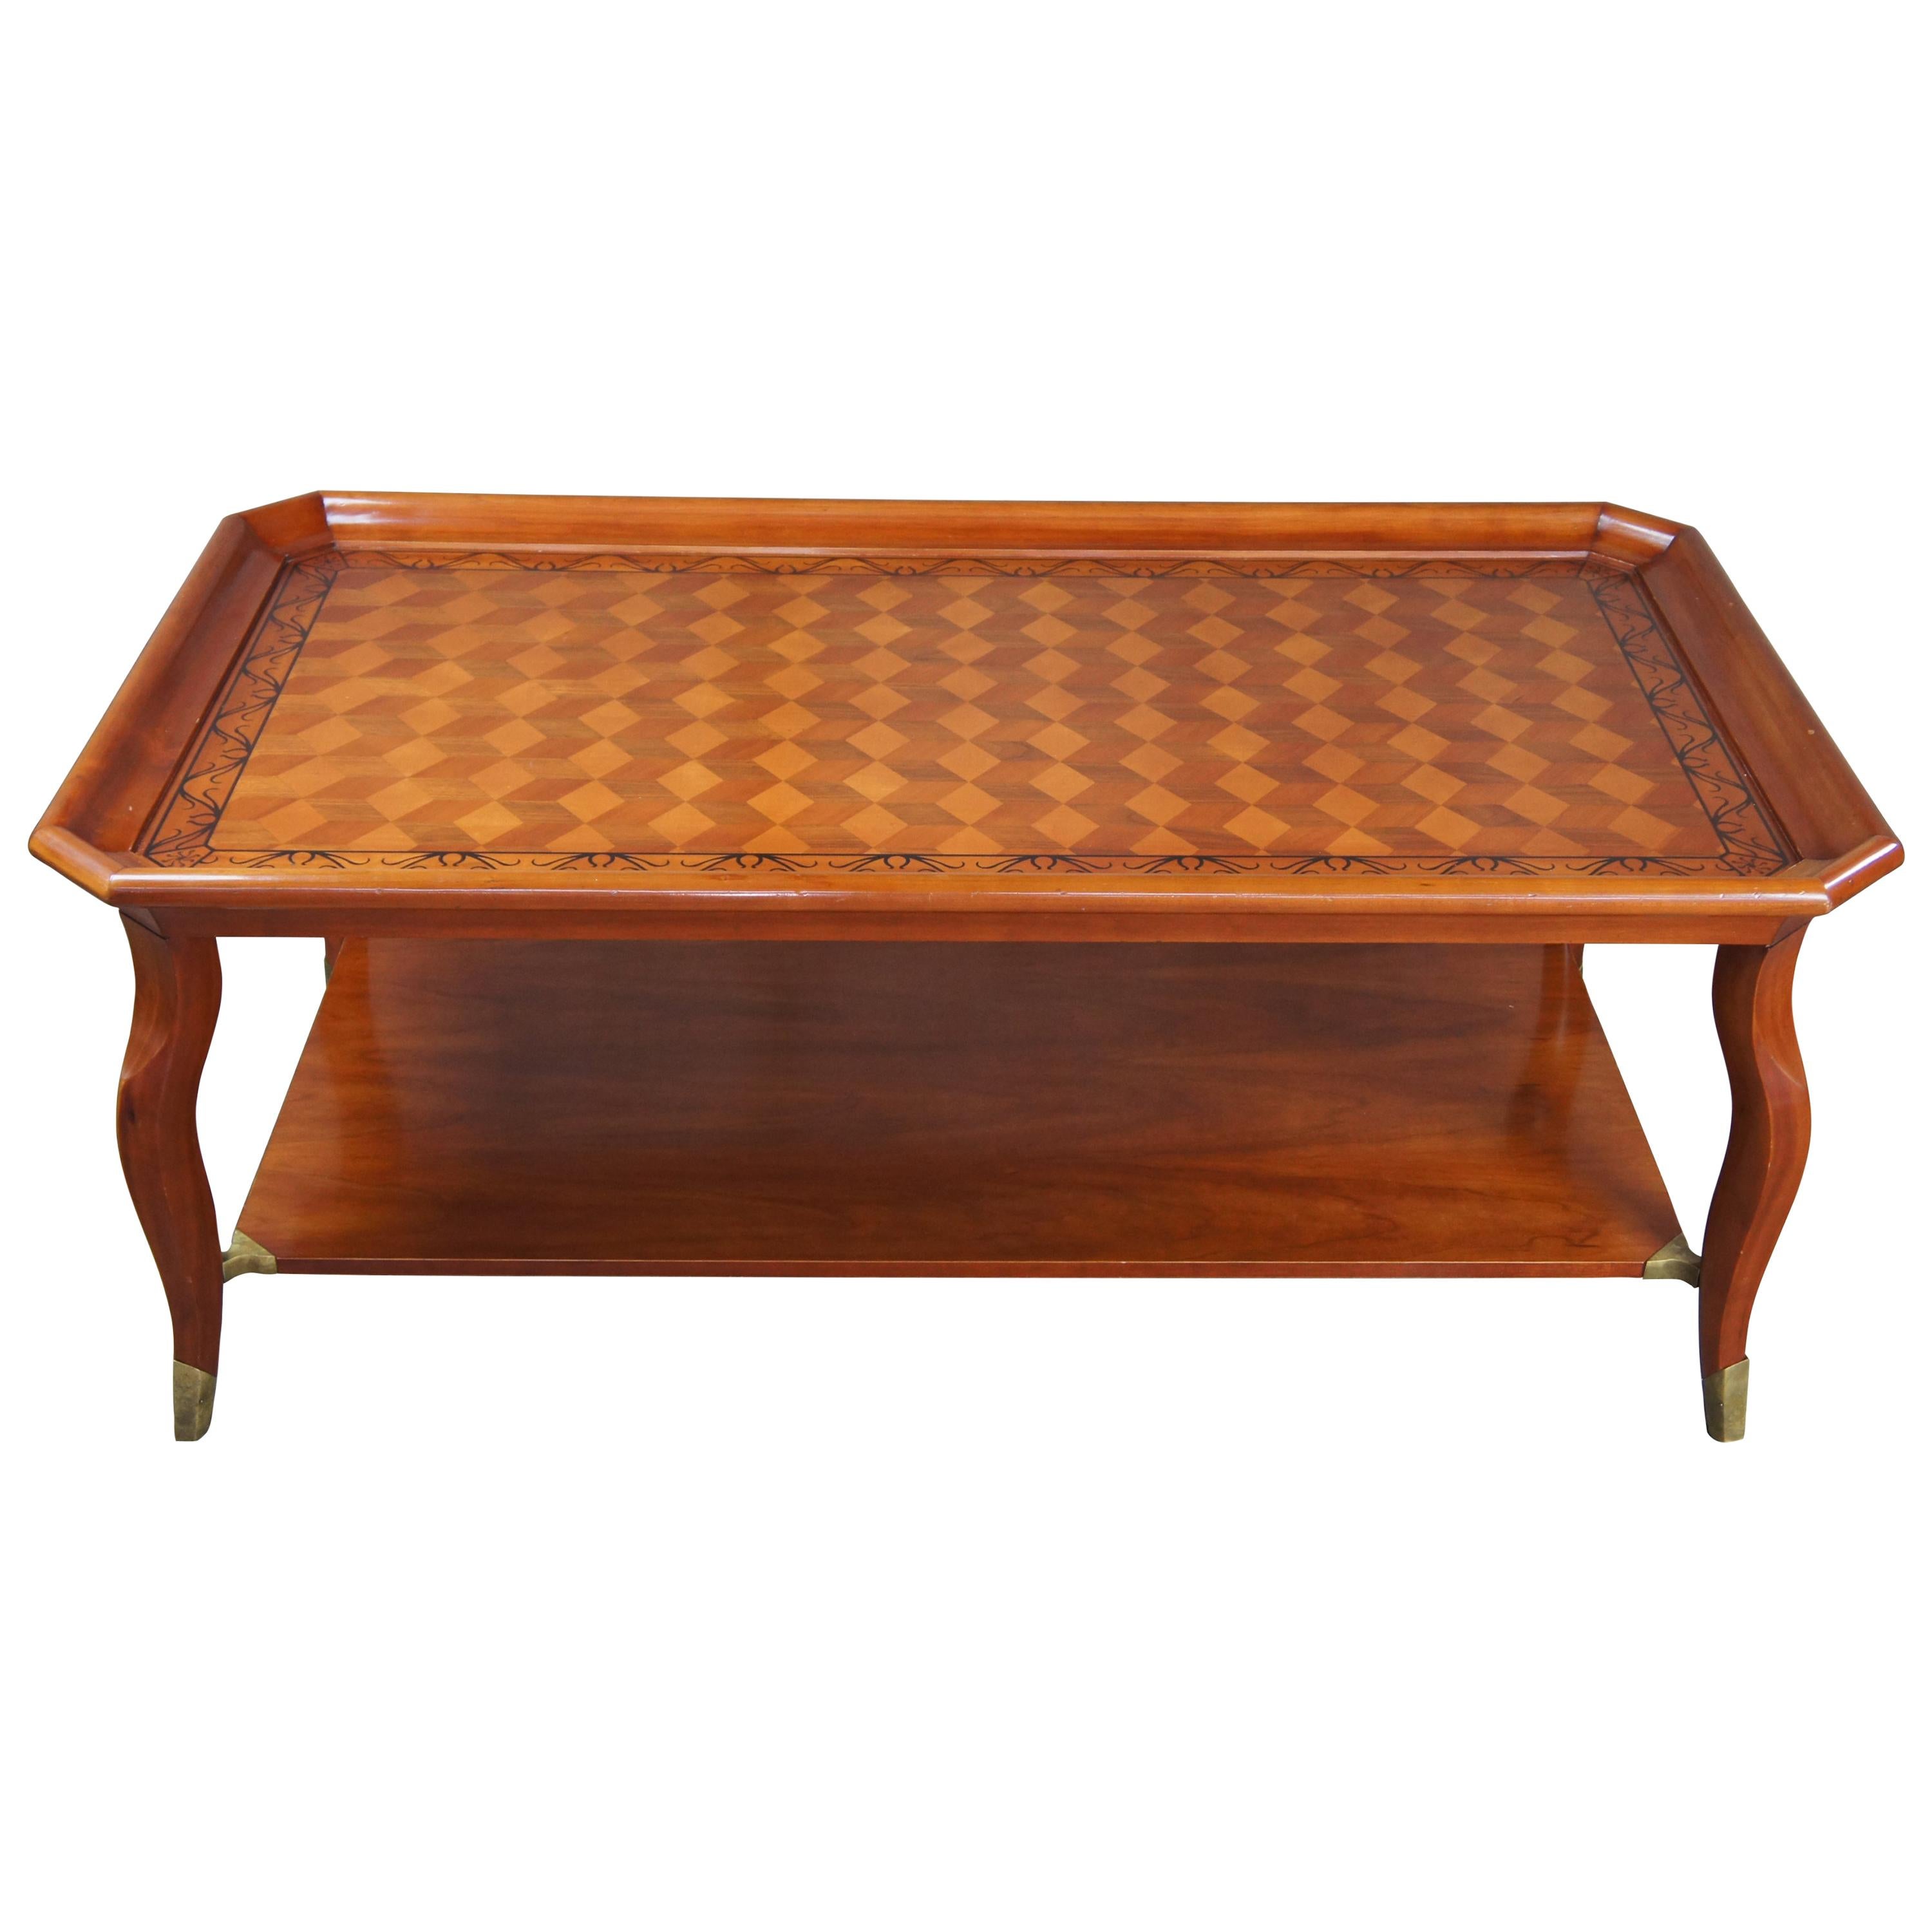 John Widdicomb Marquetry Inlaid Coffee Cocktail Table French Inspired Cherry